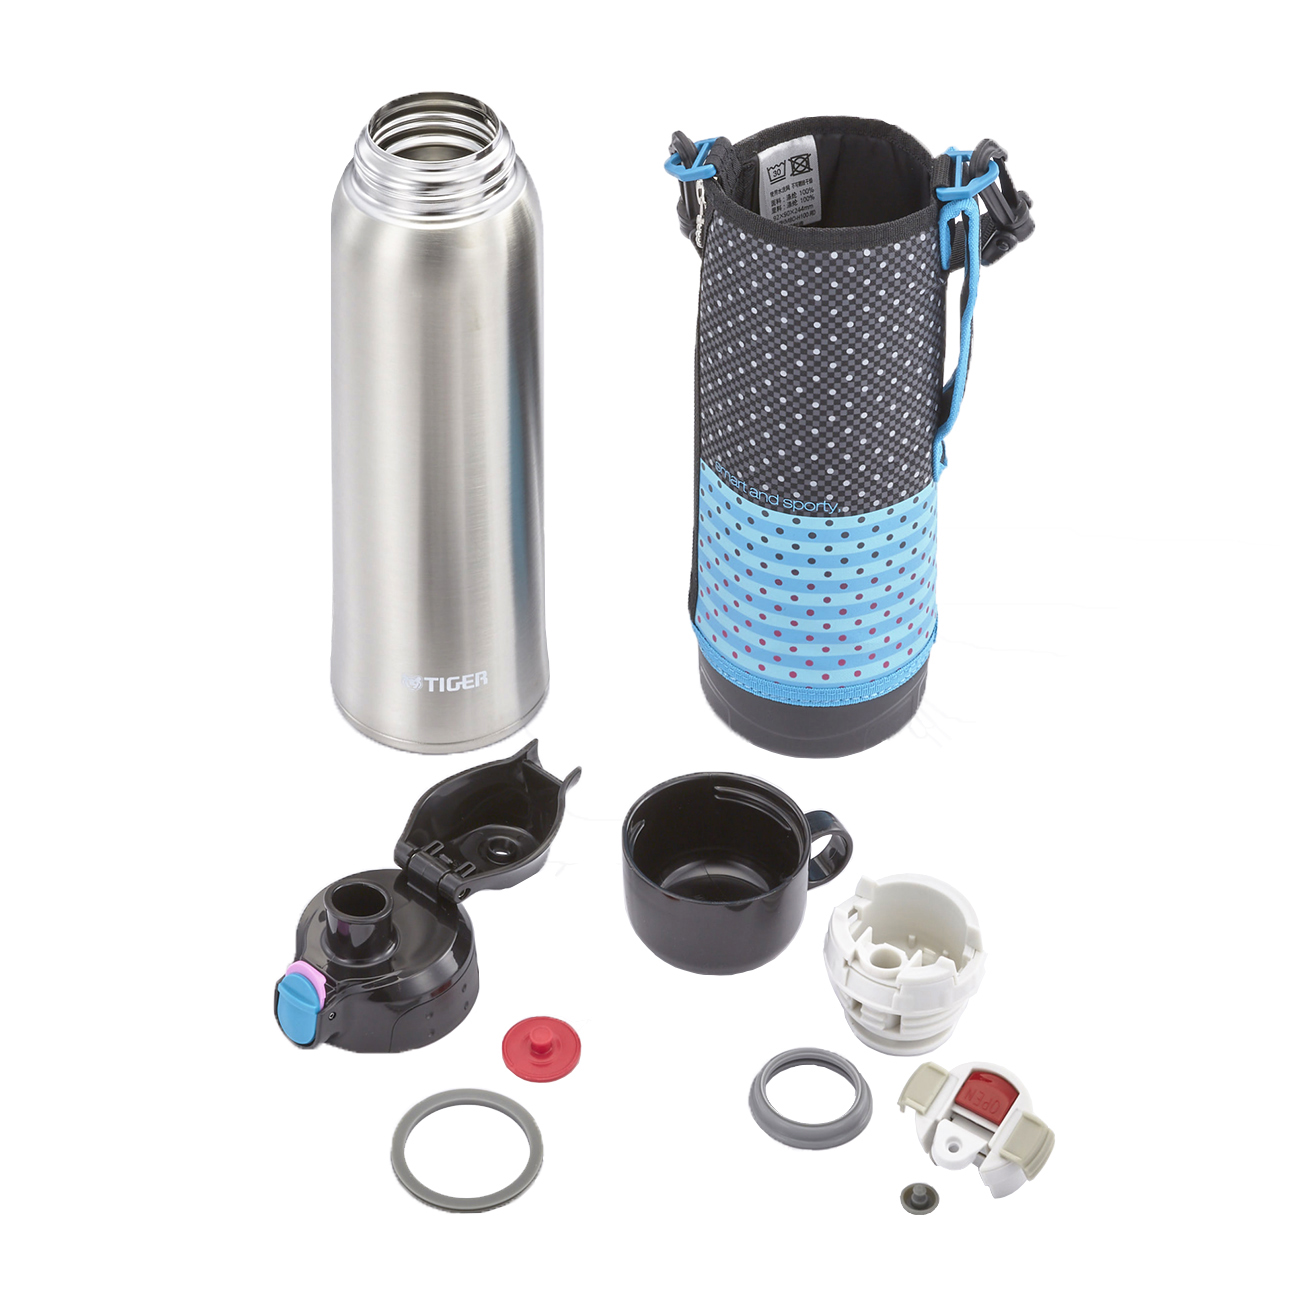 Two-way-sports-stainless-steel-thermal-bottle-mob-h-detachable-parts-for-comprehensive-cleaning.jpg (461 KB)